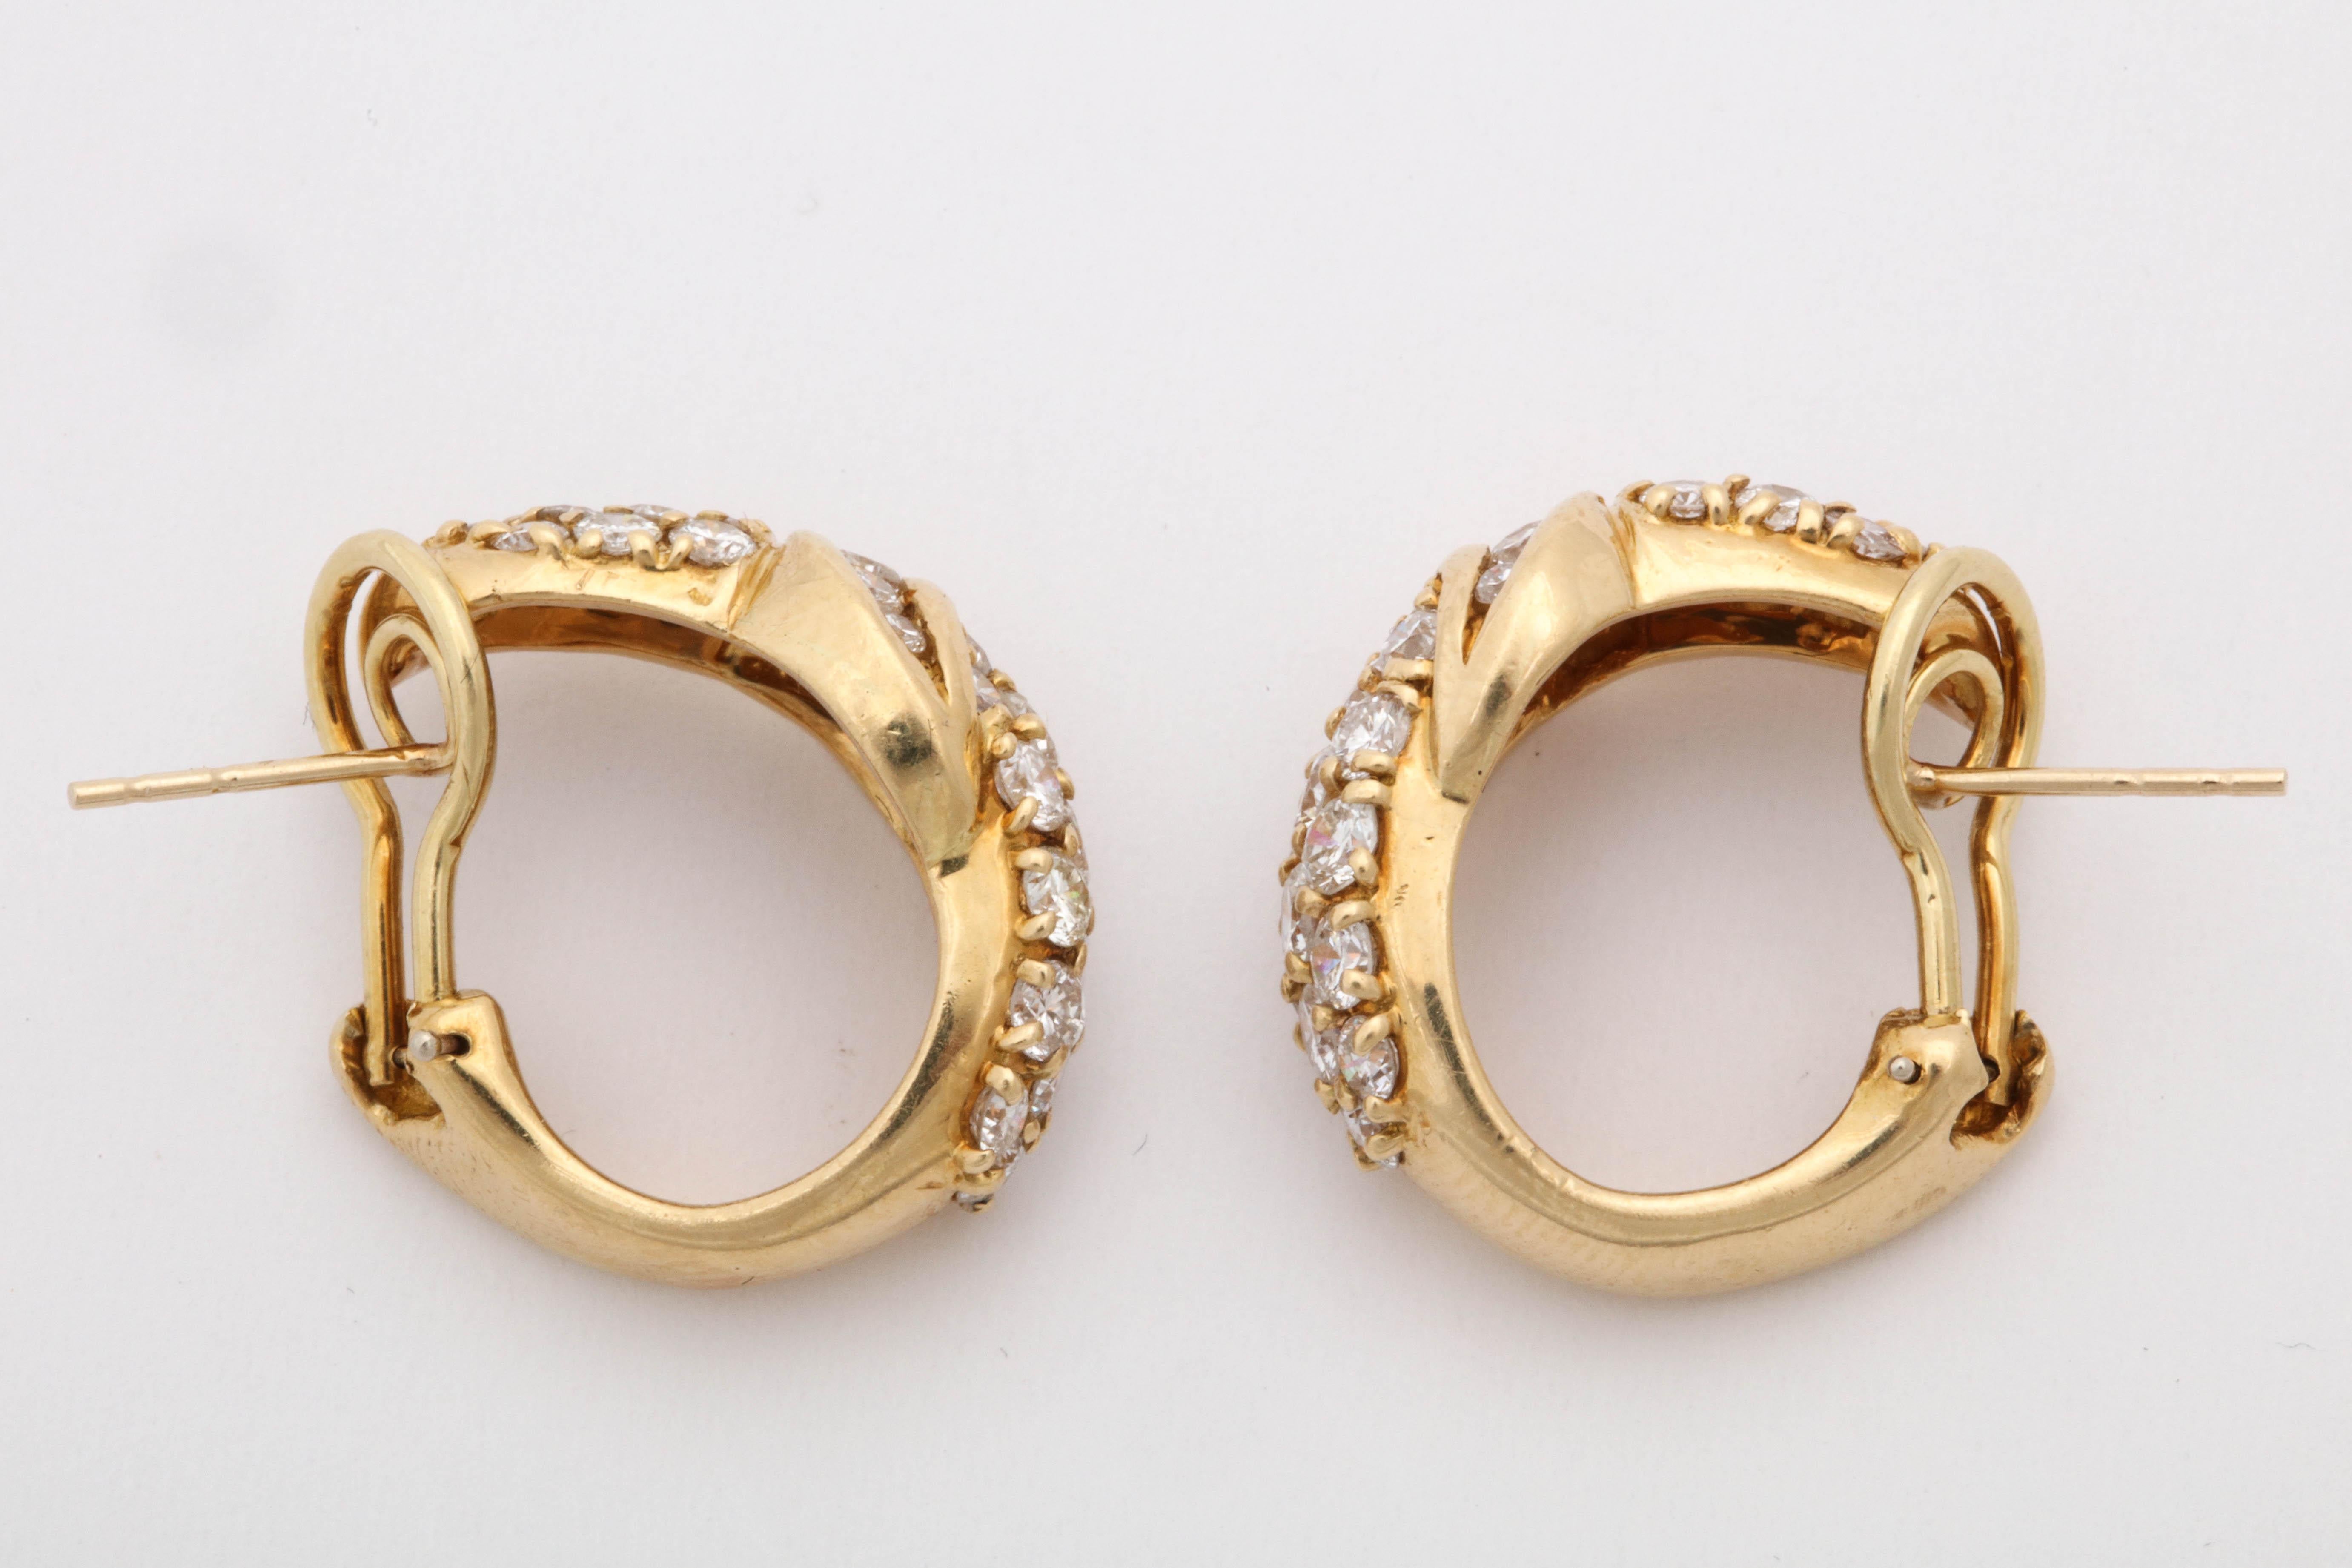 Women's 1960s Hammerman Half Hoop Design Diamond and Gold Clip-On Earrings with Posts